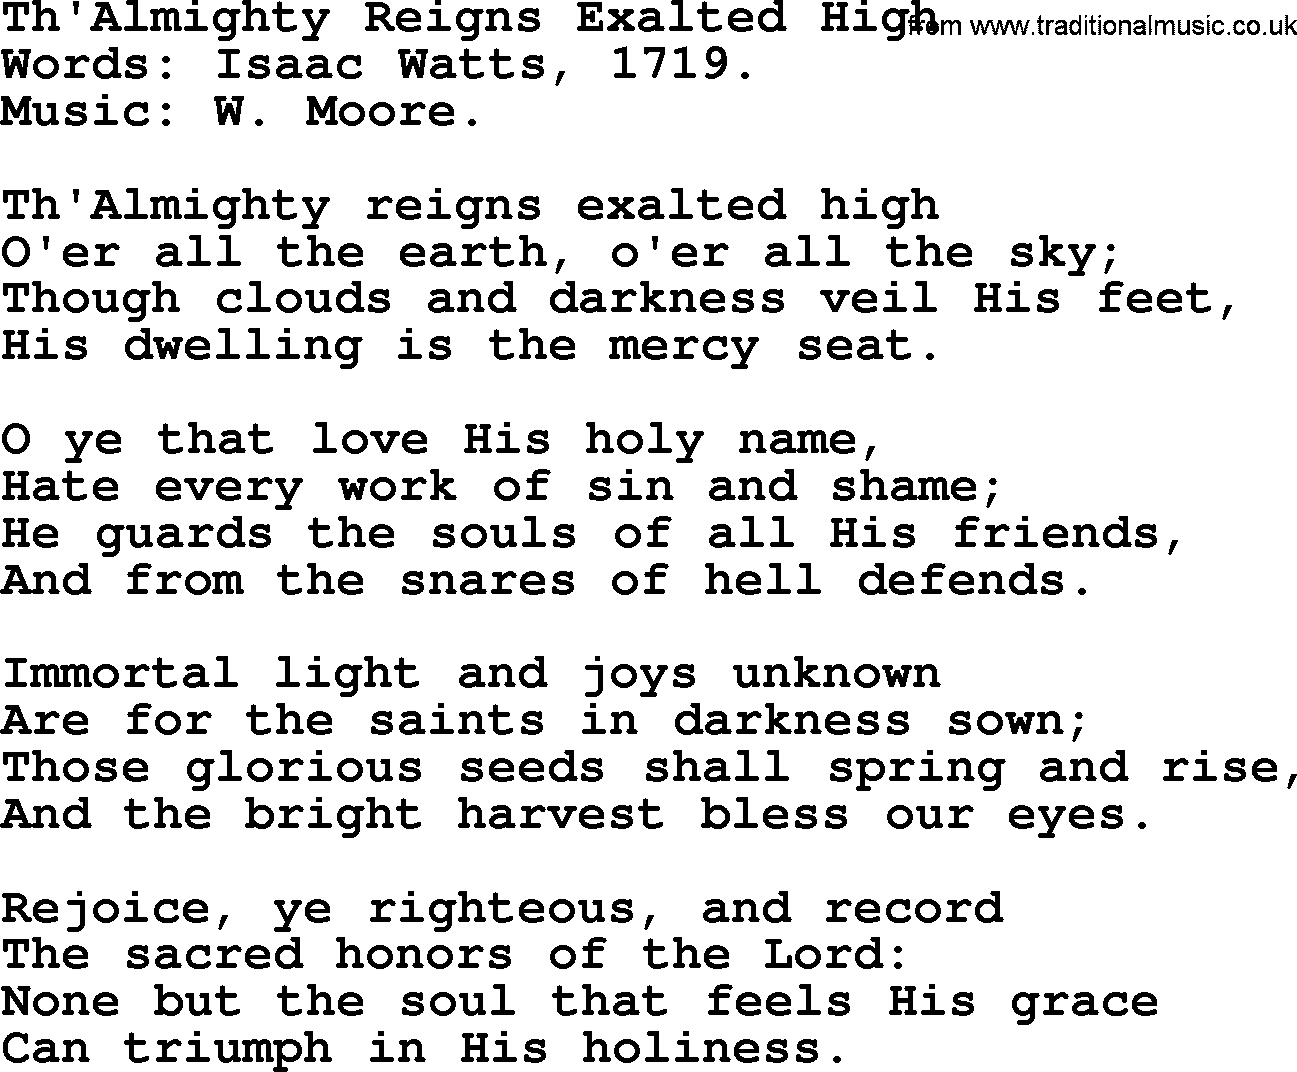 Isaac Watts Christian hymn: Th'Almighty Reigns Exalted High- lyricss